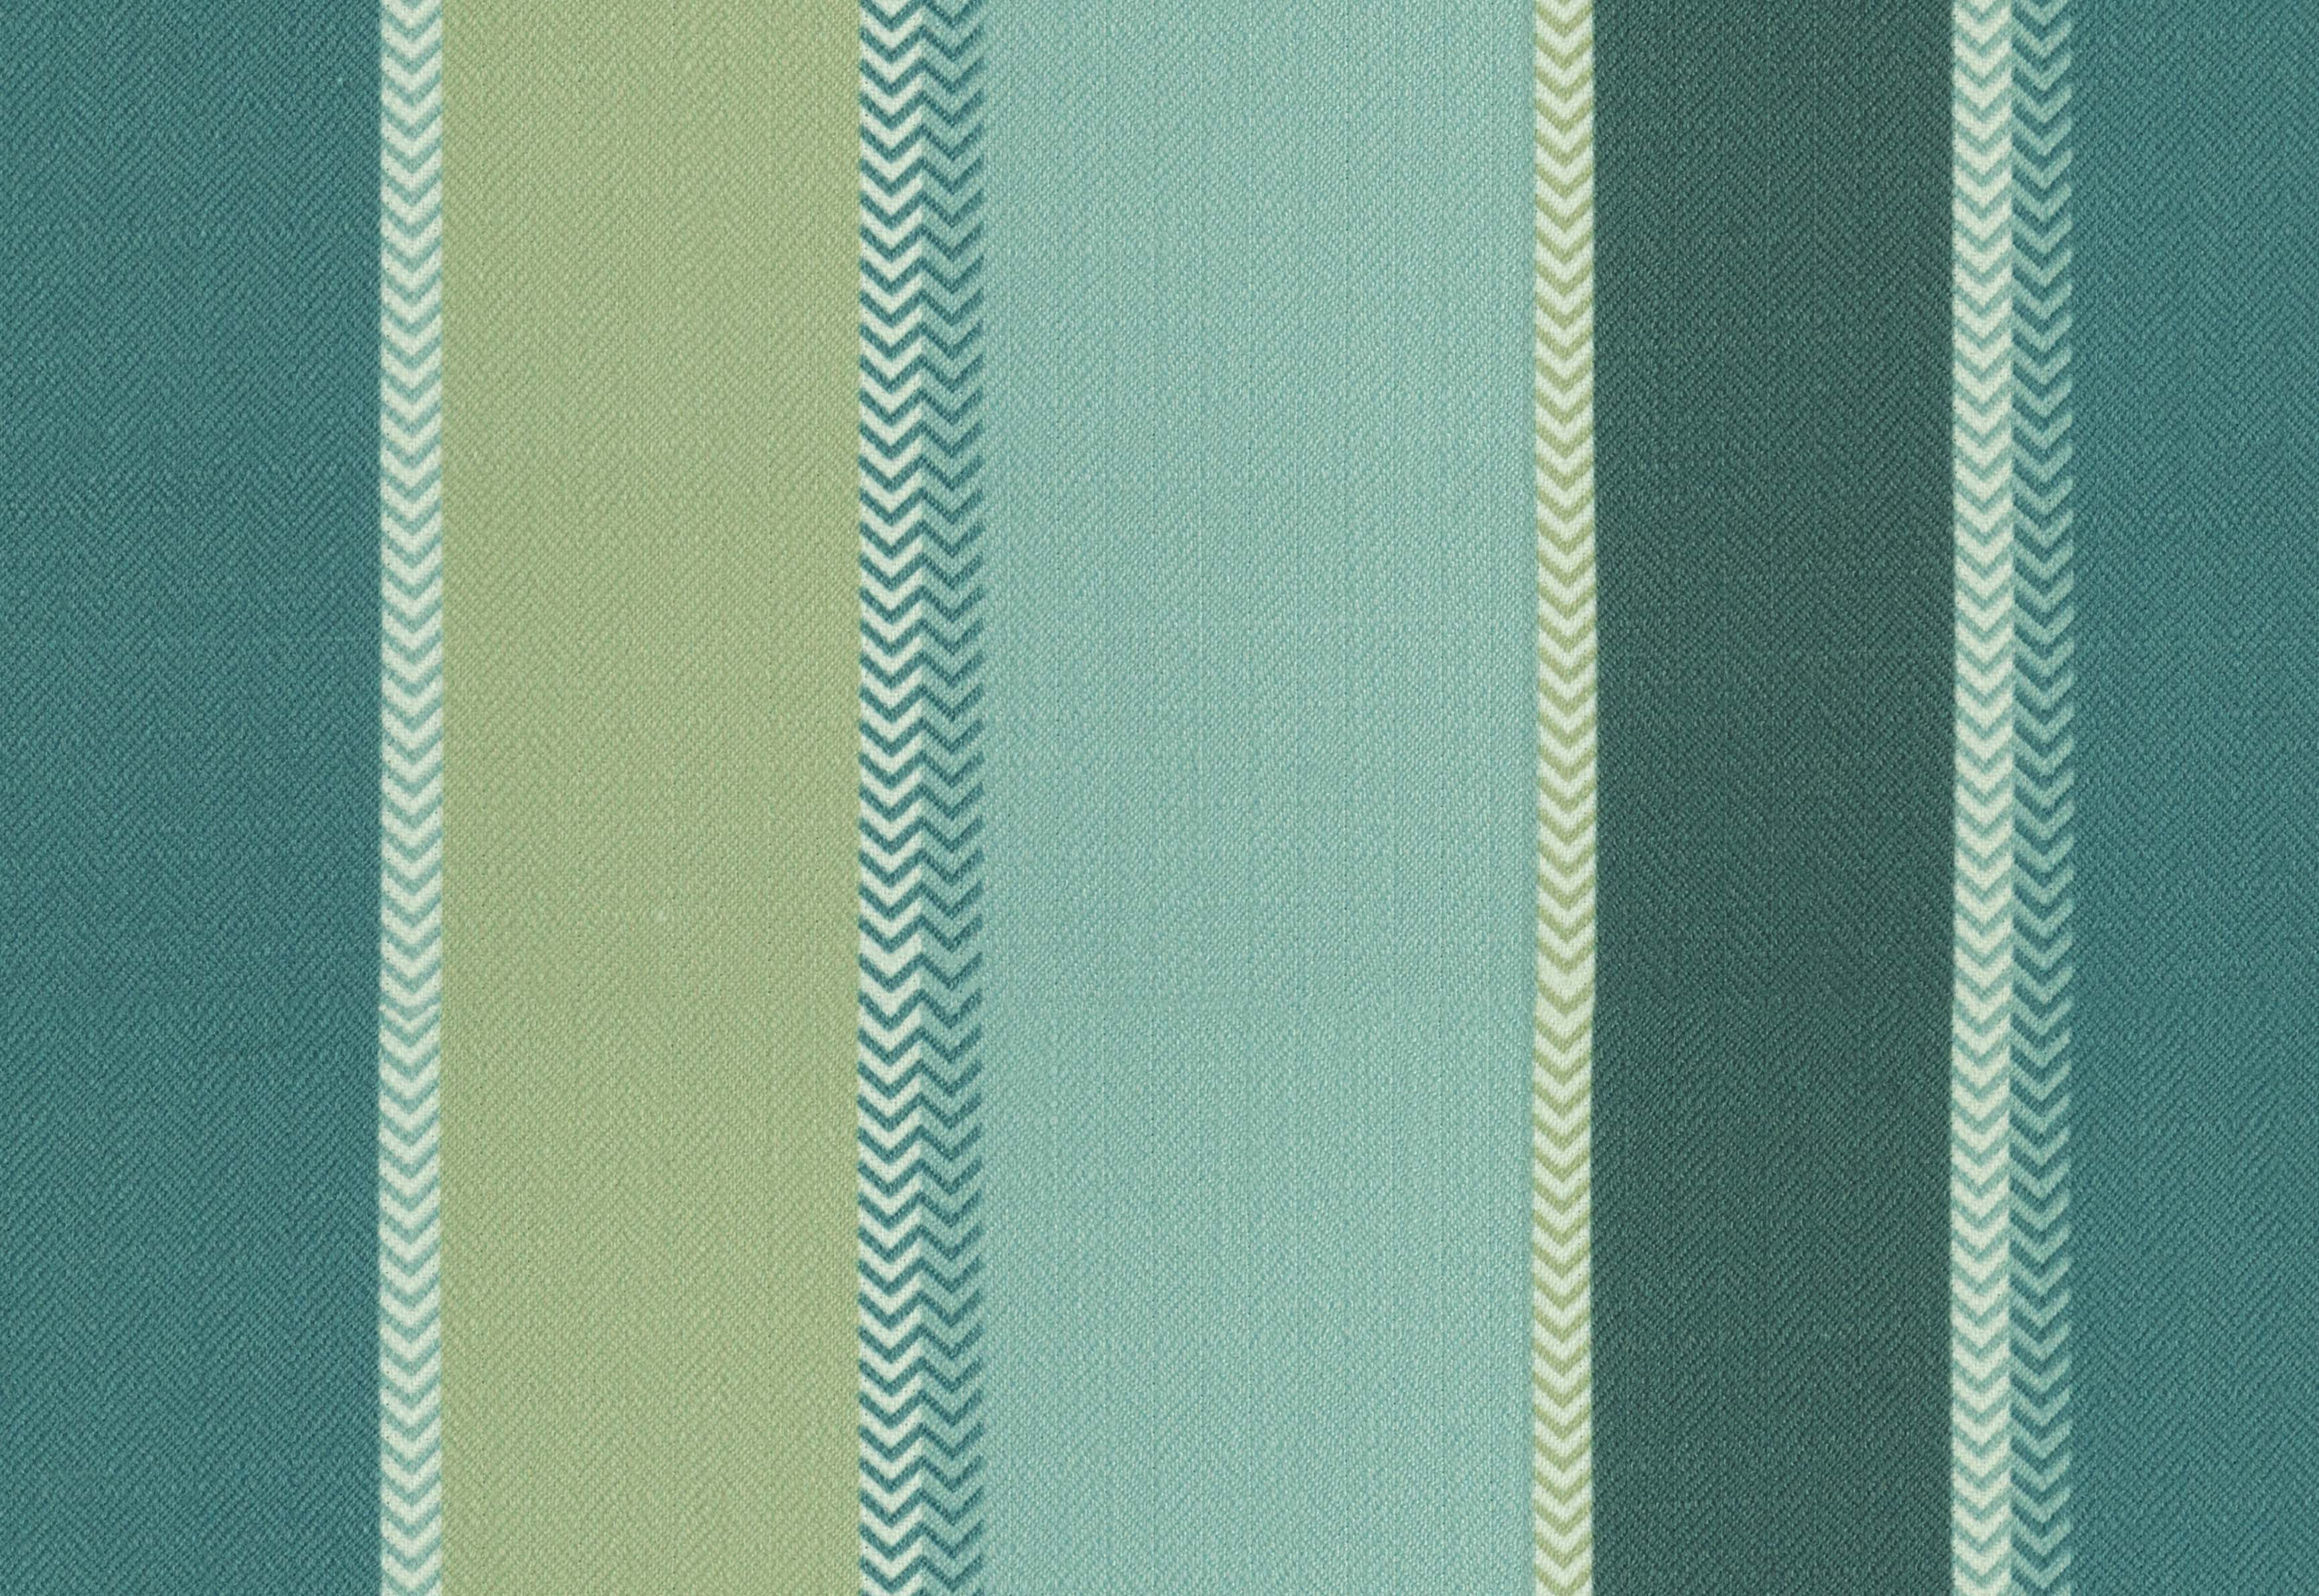 Feather Mistyteal Fabric